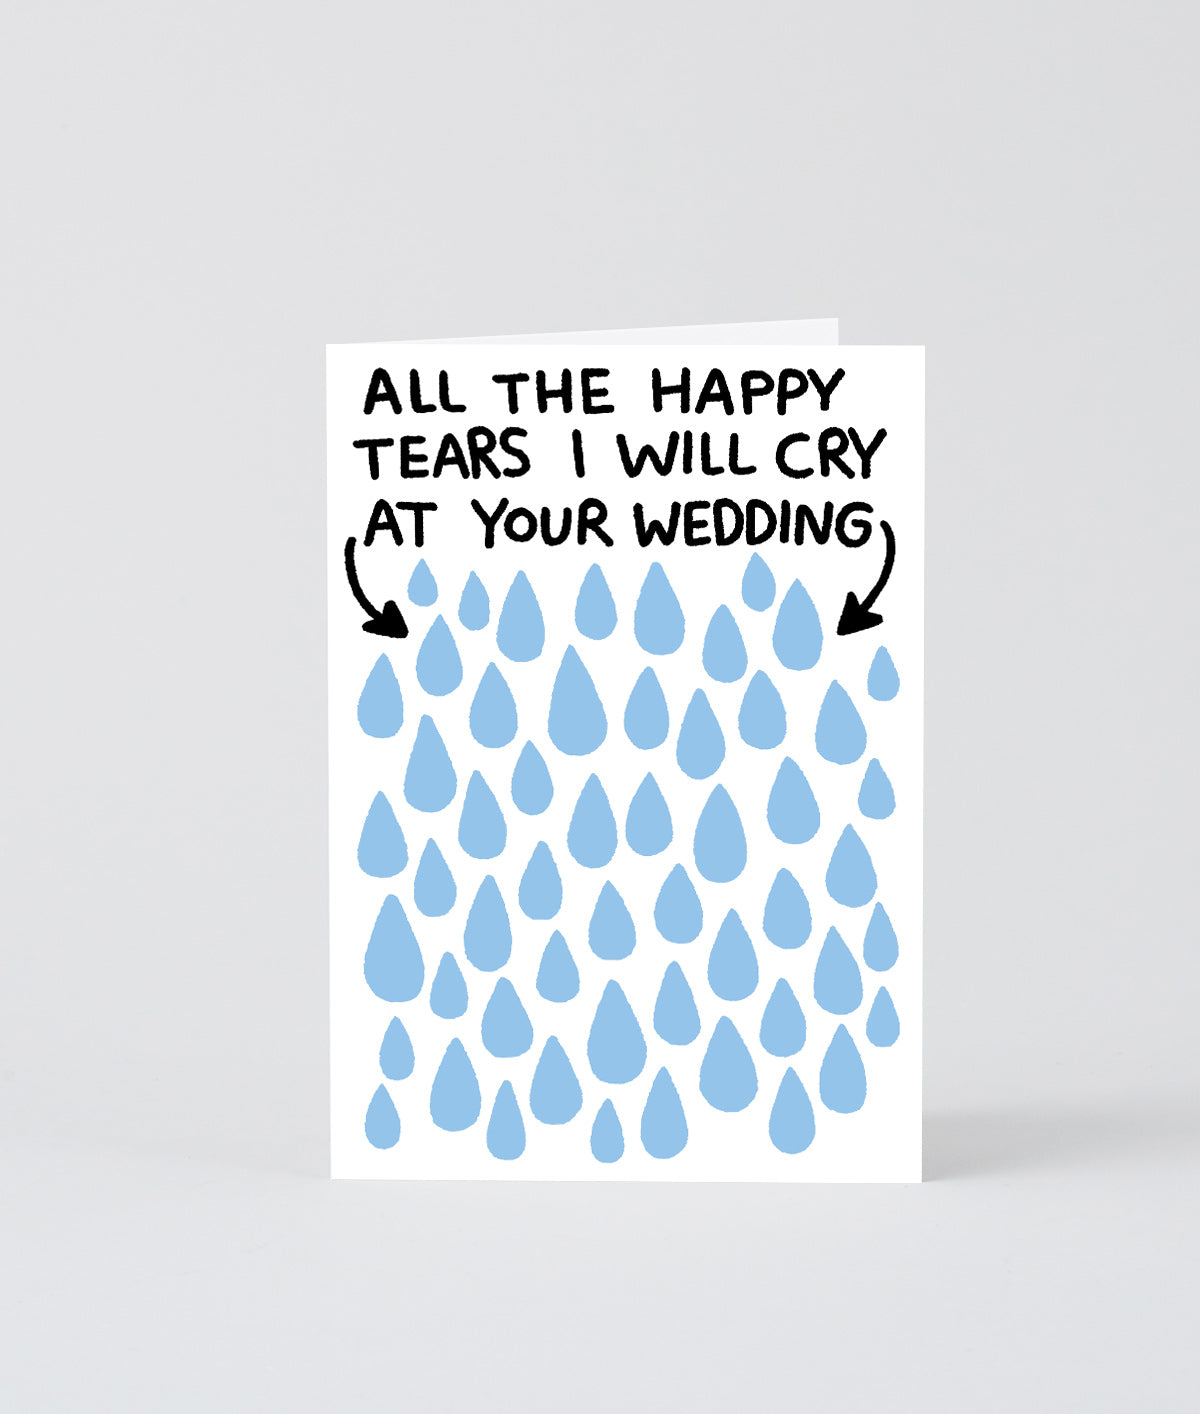 on this wedding celebration greetings card several teardrops in pale blue on a white background and two black arrows indicating all the happy tears that will be shed at the wedding